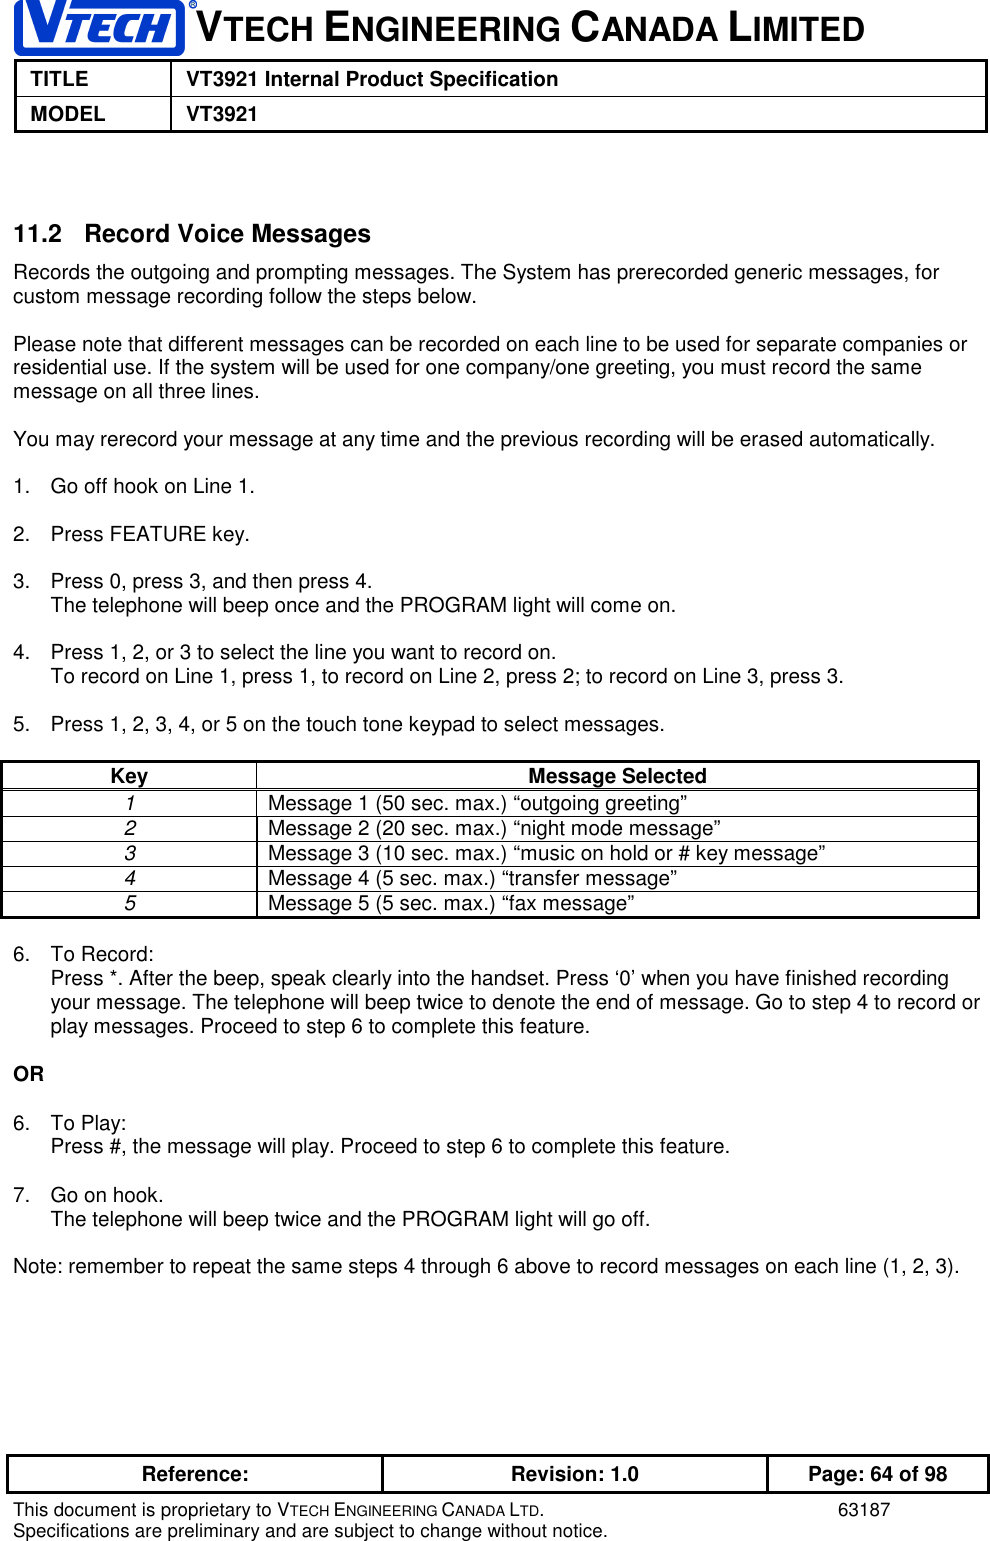 VTECH ENGINEERING CANADA LIMITEDTITLE VT3921 Internal Product SpecificationMODEL VT3921Reference: Revision: 1.0 Page: 64 of 98This document is proprietary to VTECH ENGINEERING CANADA LTD. 63187Specifications are preliminary and are subject to change without notice.11.2   Record Voice MessagesRecords the outgoing and prompting messages. The System has prerecorded generic messages, forcustom message recording follow the steps below.Please note that different messages can be recorded on each line to be used for separate companies orresidential use. If the system will be used for one company/one greeting, you must record the samemessage on all three lines.You may rerecord your message at any time and the previous recording will be erased automatically.1.  Go off hook on Line 1.2.  Press FEATURE key.3.  Press 0, press 3, and then press 4.The telephone will beep once and the PROGRAM light will come on.4.  Press 1, 2, or 3 to select the line you want to record on.To record on Line 1, press 1, to record on Line 2, press 2; to record on Line 3, press 3.5.  Press 1, 2, 3, 4, or 5 on the touch tone keypad to select messages.Key Message Selected1Message 1 (50 sec. max.) “outgoing greeting”2Message 2 (20 sec. max.) “night mode message”3Message 3 (10 sec. max.) “music on hold or # key message”4Message 4 (5 sec. max.) “transfer message”5Message 5 (5 sec. max.) “fax message”6. To Record:Press *. After the beep, speak clearly into the handset. Press ‘0’ when you have finished recordingyour message. The telephone will beep twice to denote the end of message. Go to step 4 to record orplay messages. Proceed to step 6 to complete this feature.OR6. To Play:Press #, the message will play. Proceed to step 6 to complete this feature.7.  Go on hook.The telephone will beep twice and the PROGRAM light will go off.Note: remember to repeat the same steps 4 through 6 above to record messages on each line (1, 2, 3).